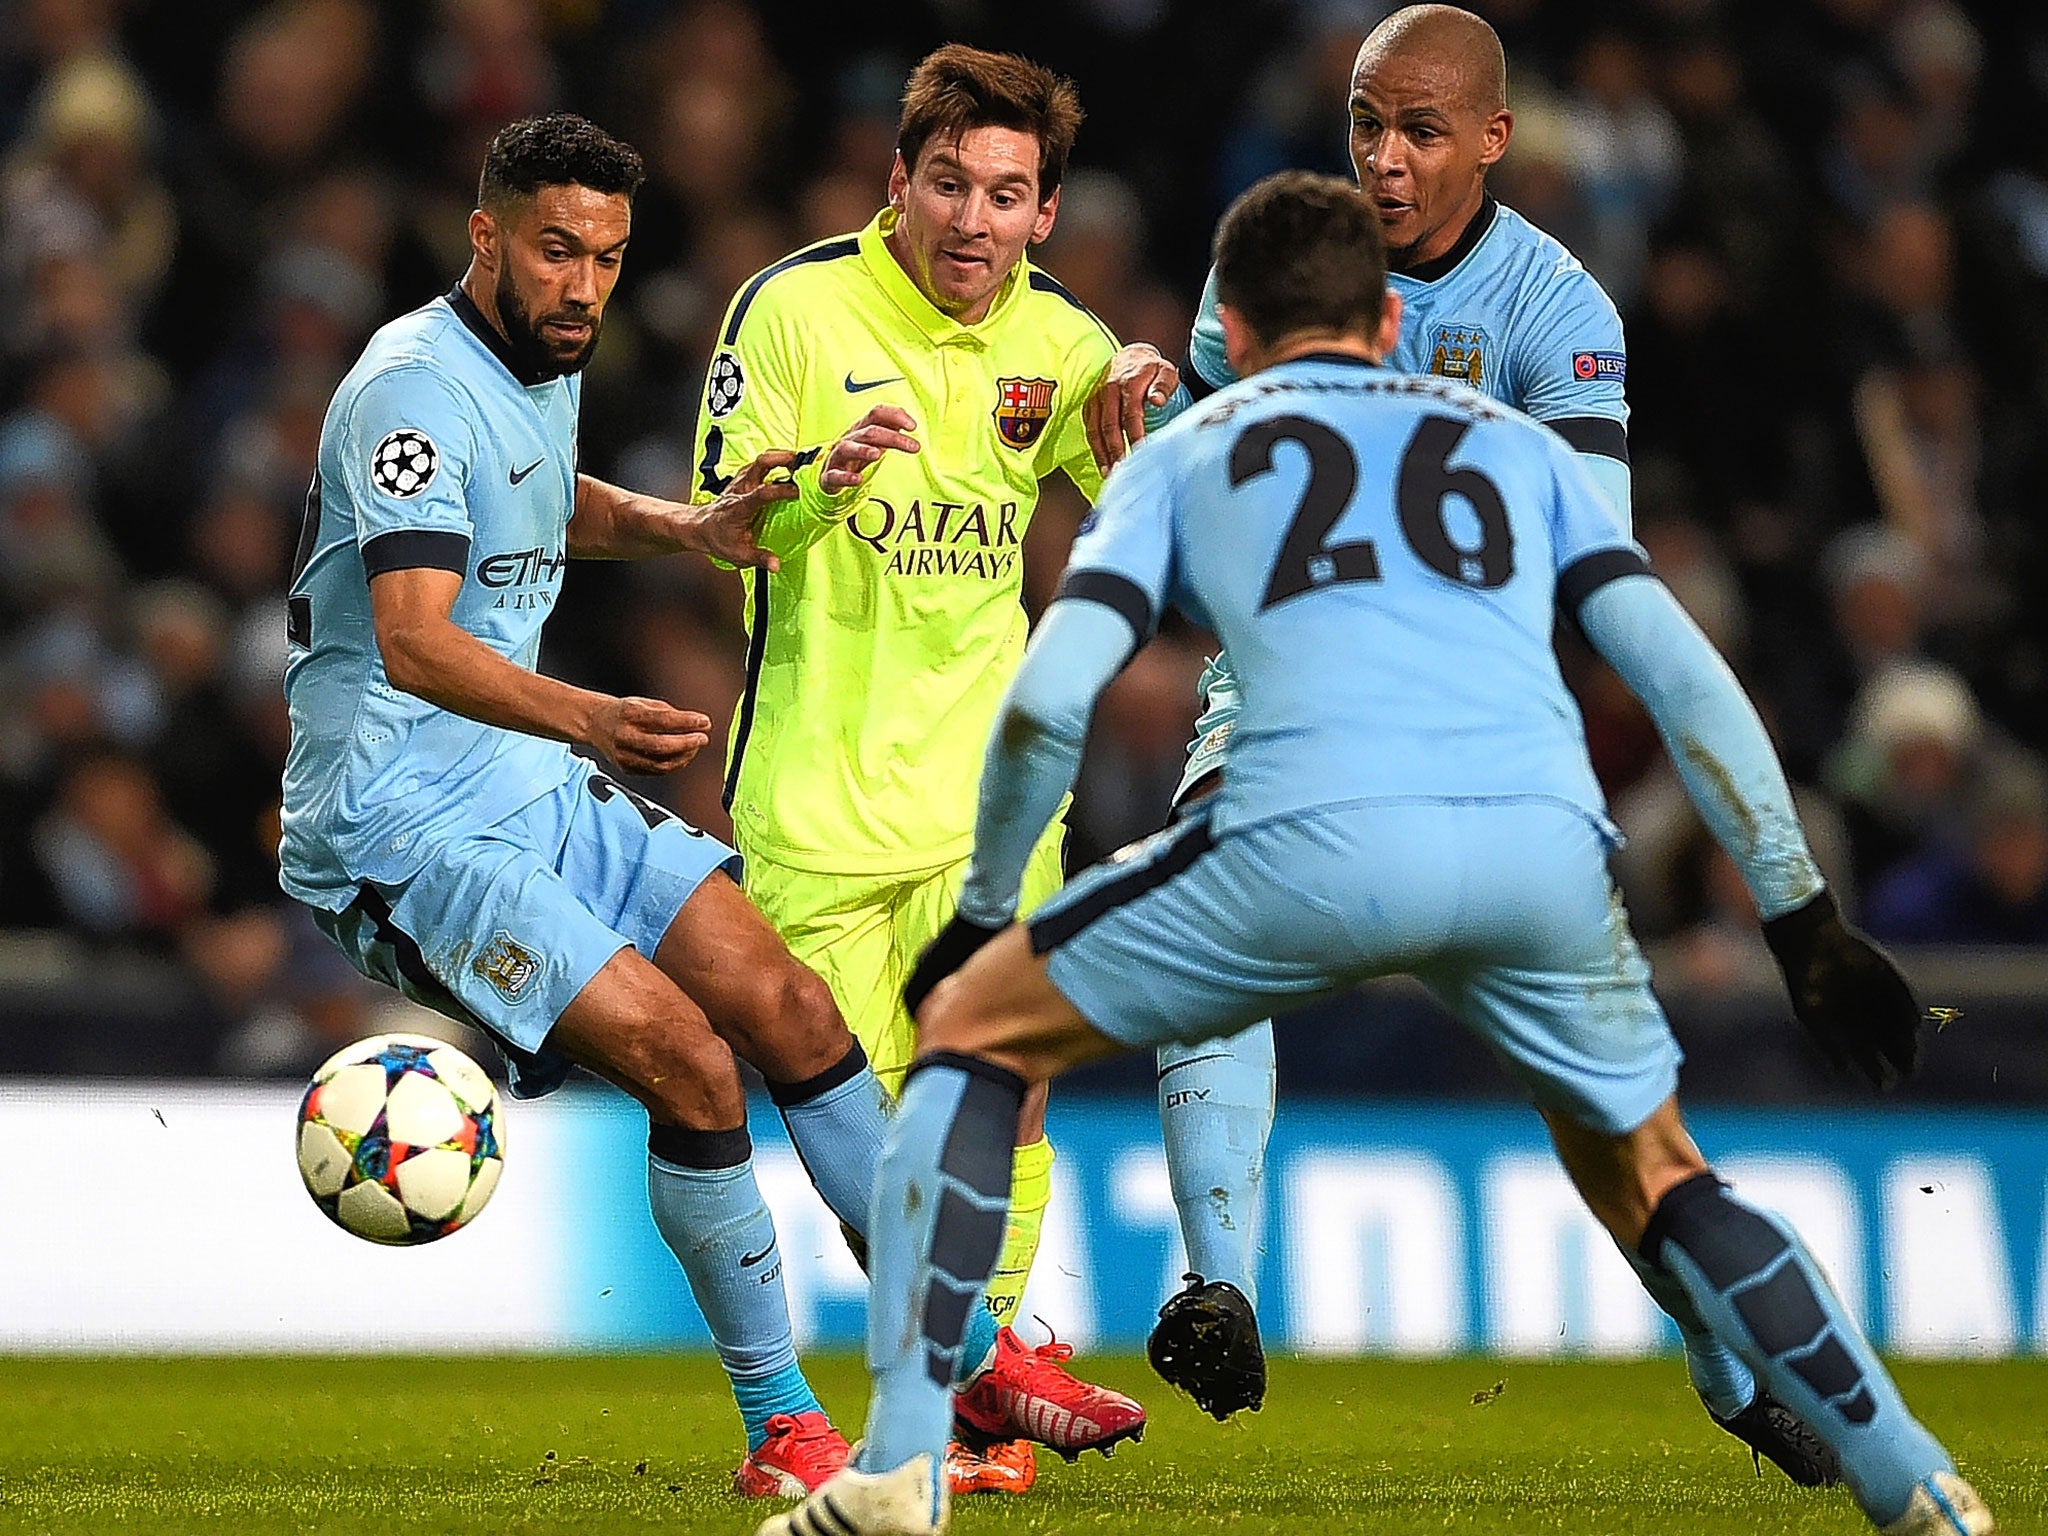 City take no chances, with three players keeping a watch on Barcelona’s Lionel Messi tonight